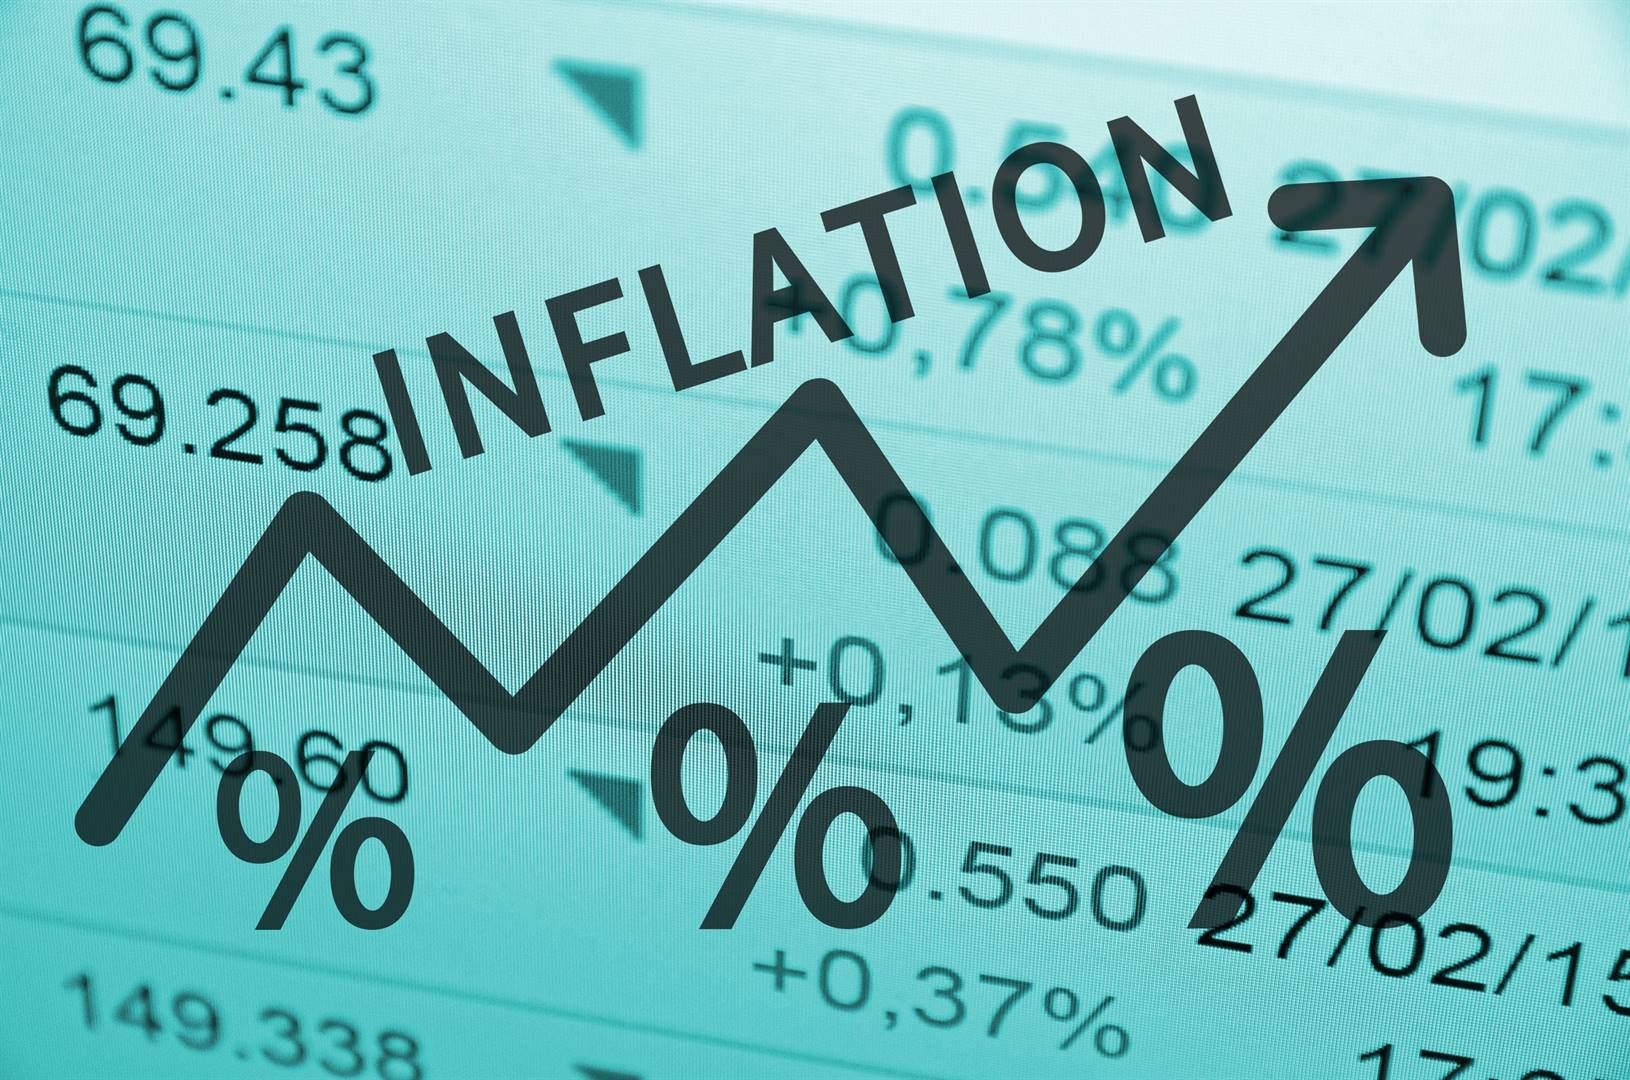 Egypt Annual Headline Inflation Slows to 9.4% in June